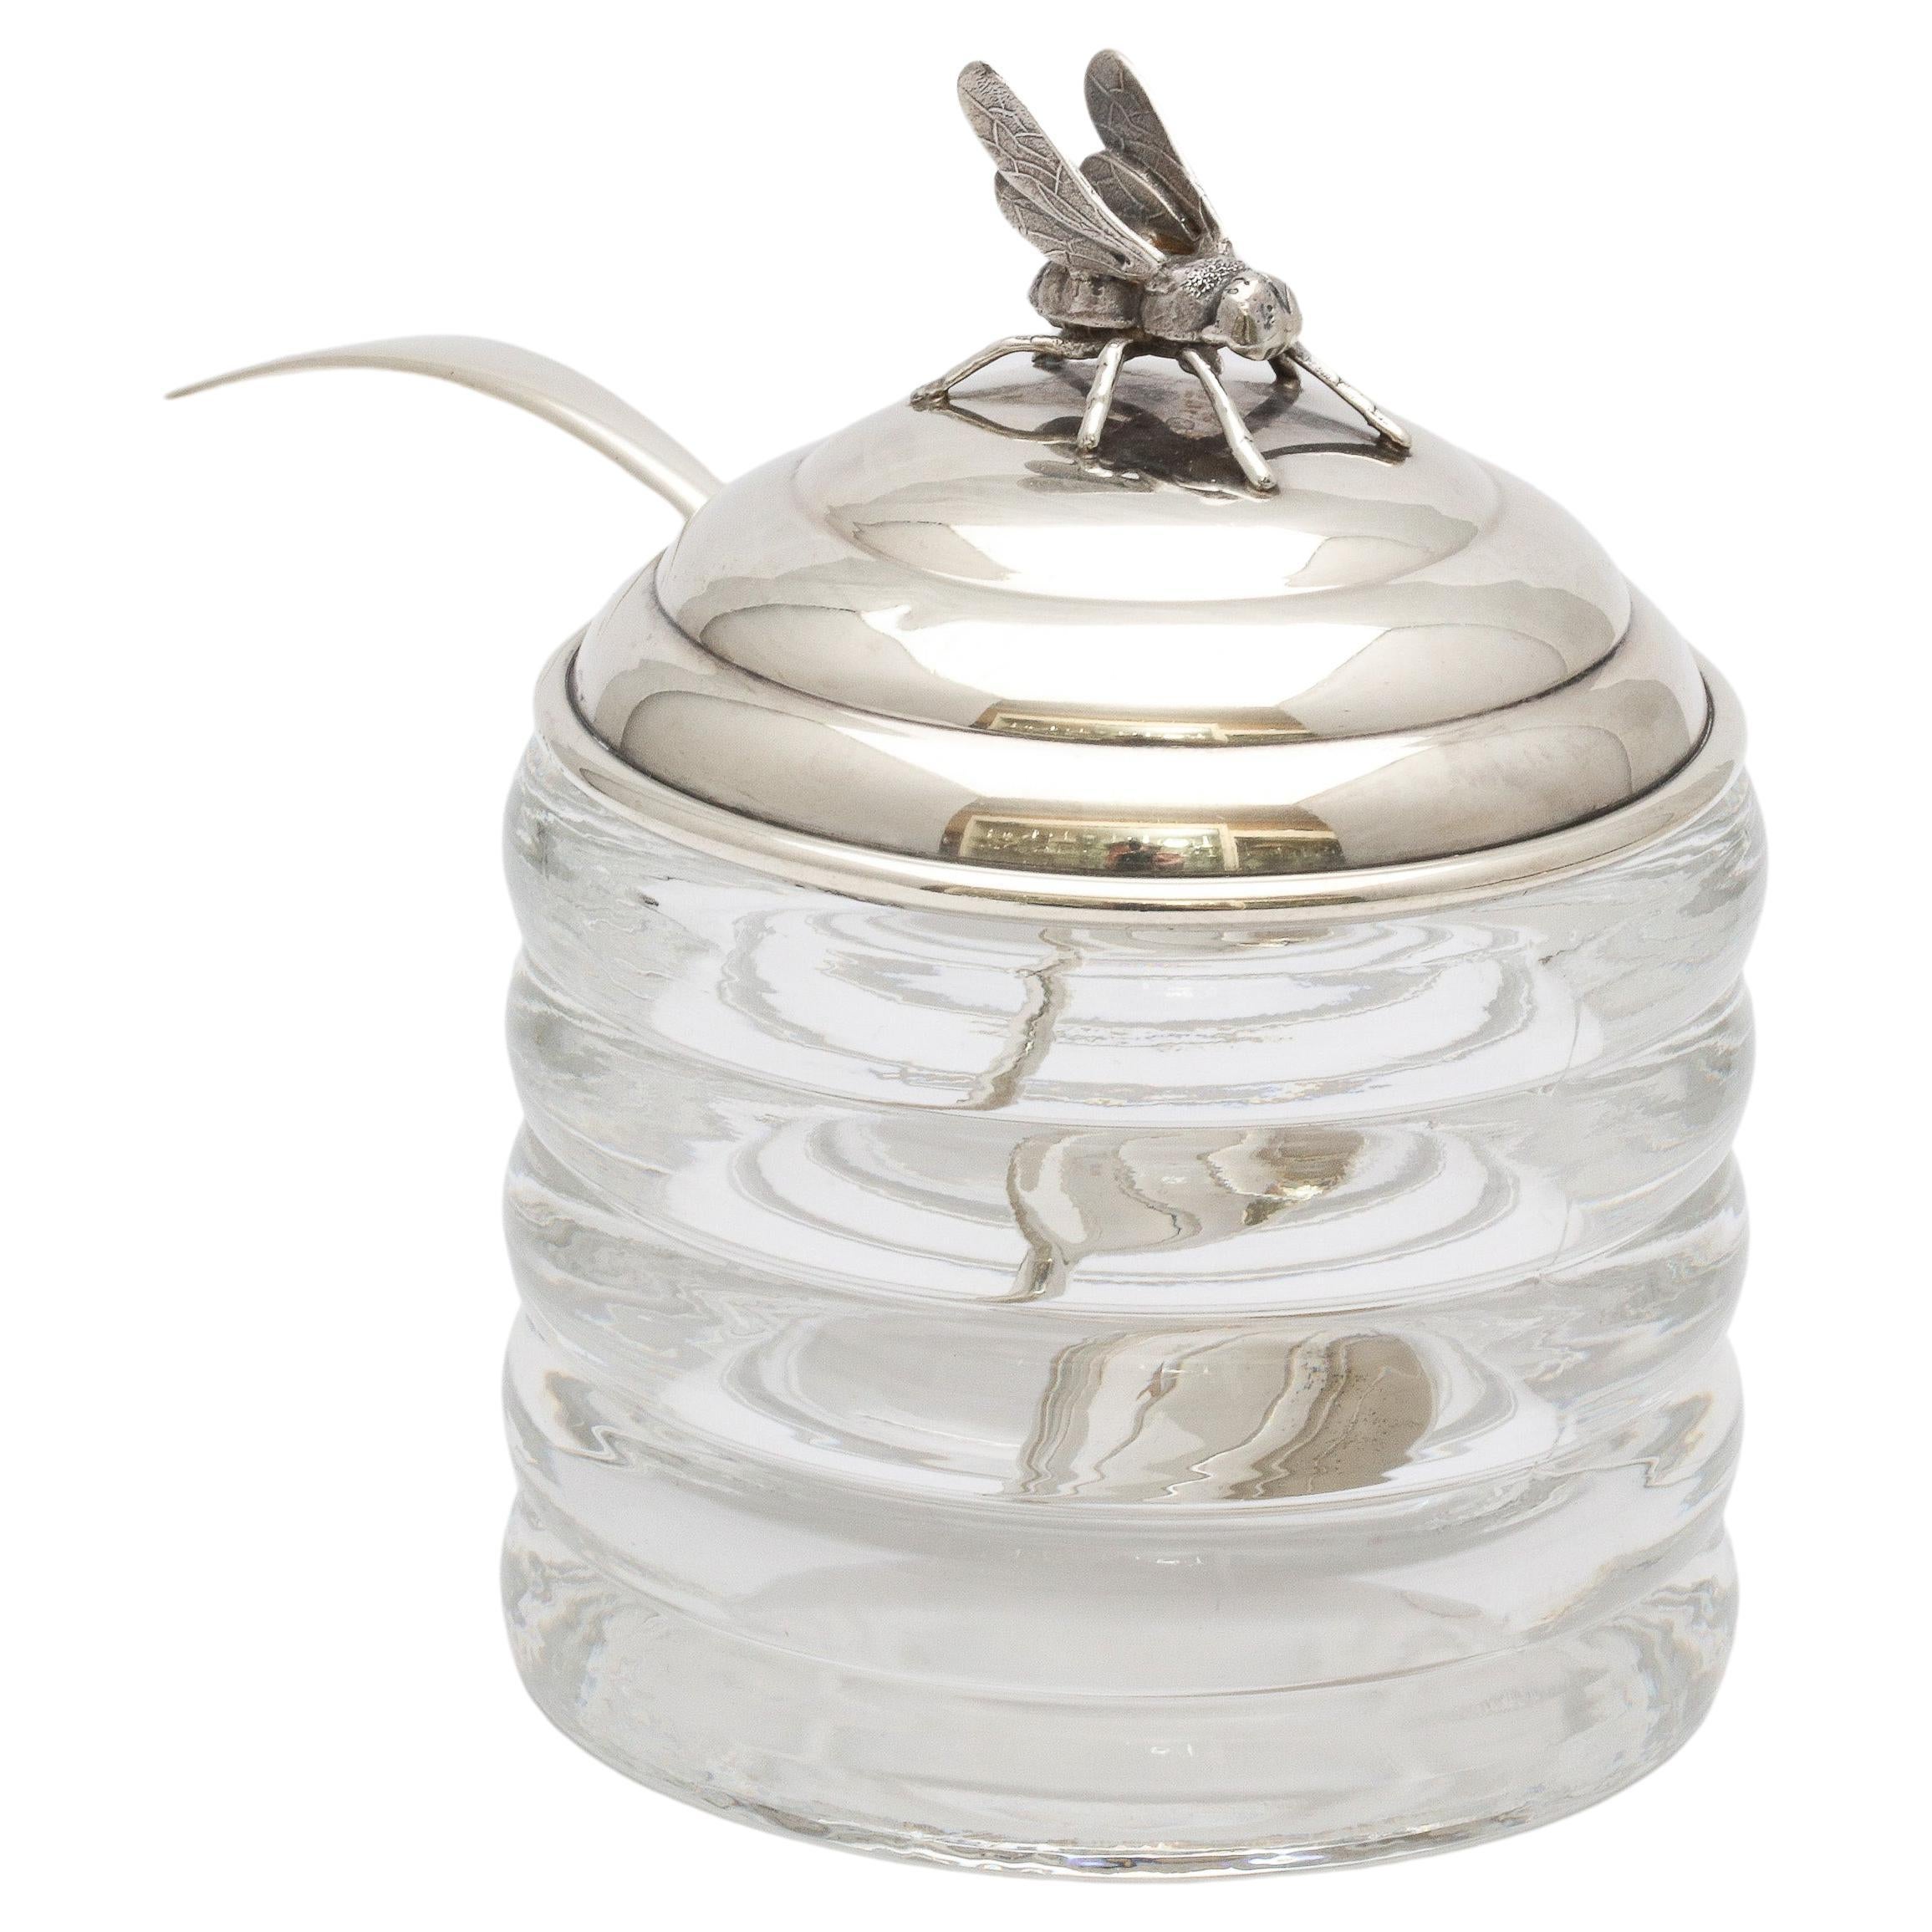 Art Deco Period Sterling Silver-Mounted Beehive-Form Honey Jar With Spoon